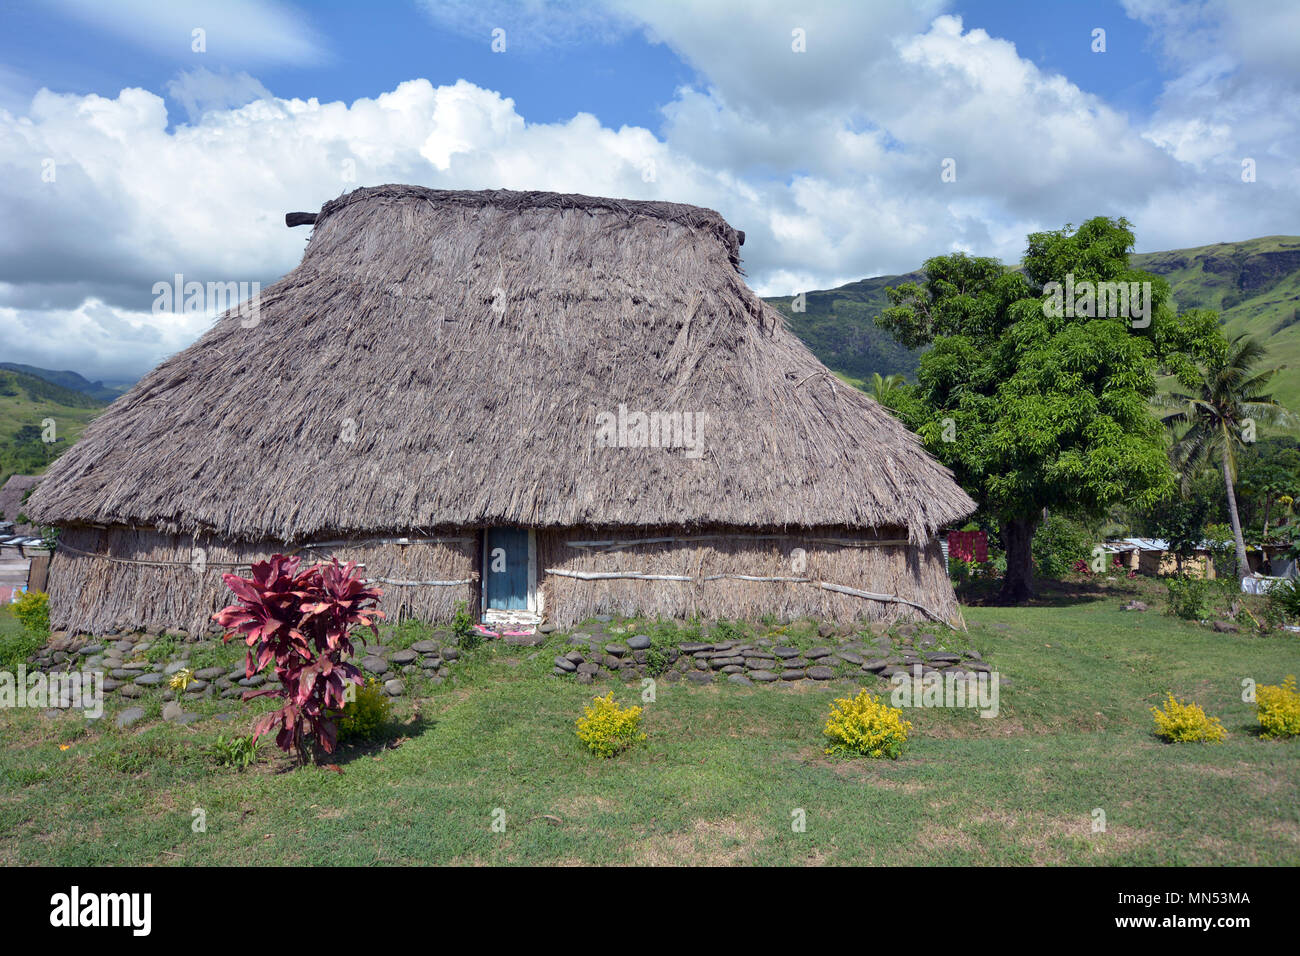 Fijian Hut High Resolution Stock Photography and Images - Alamy